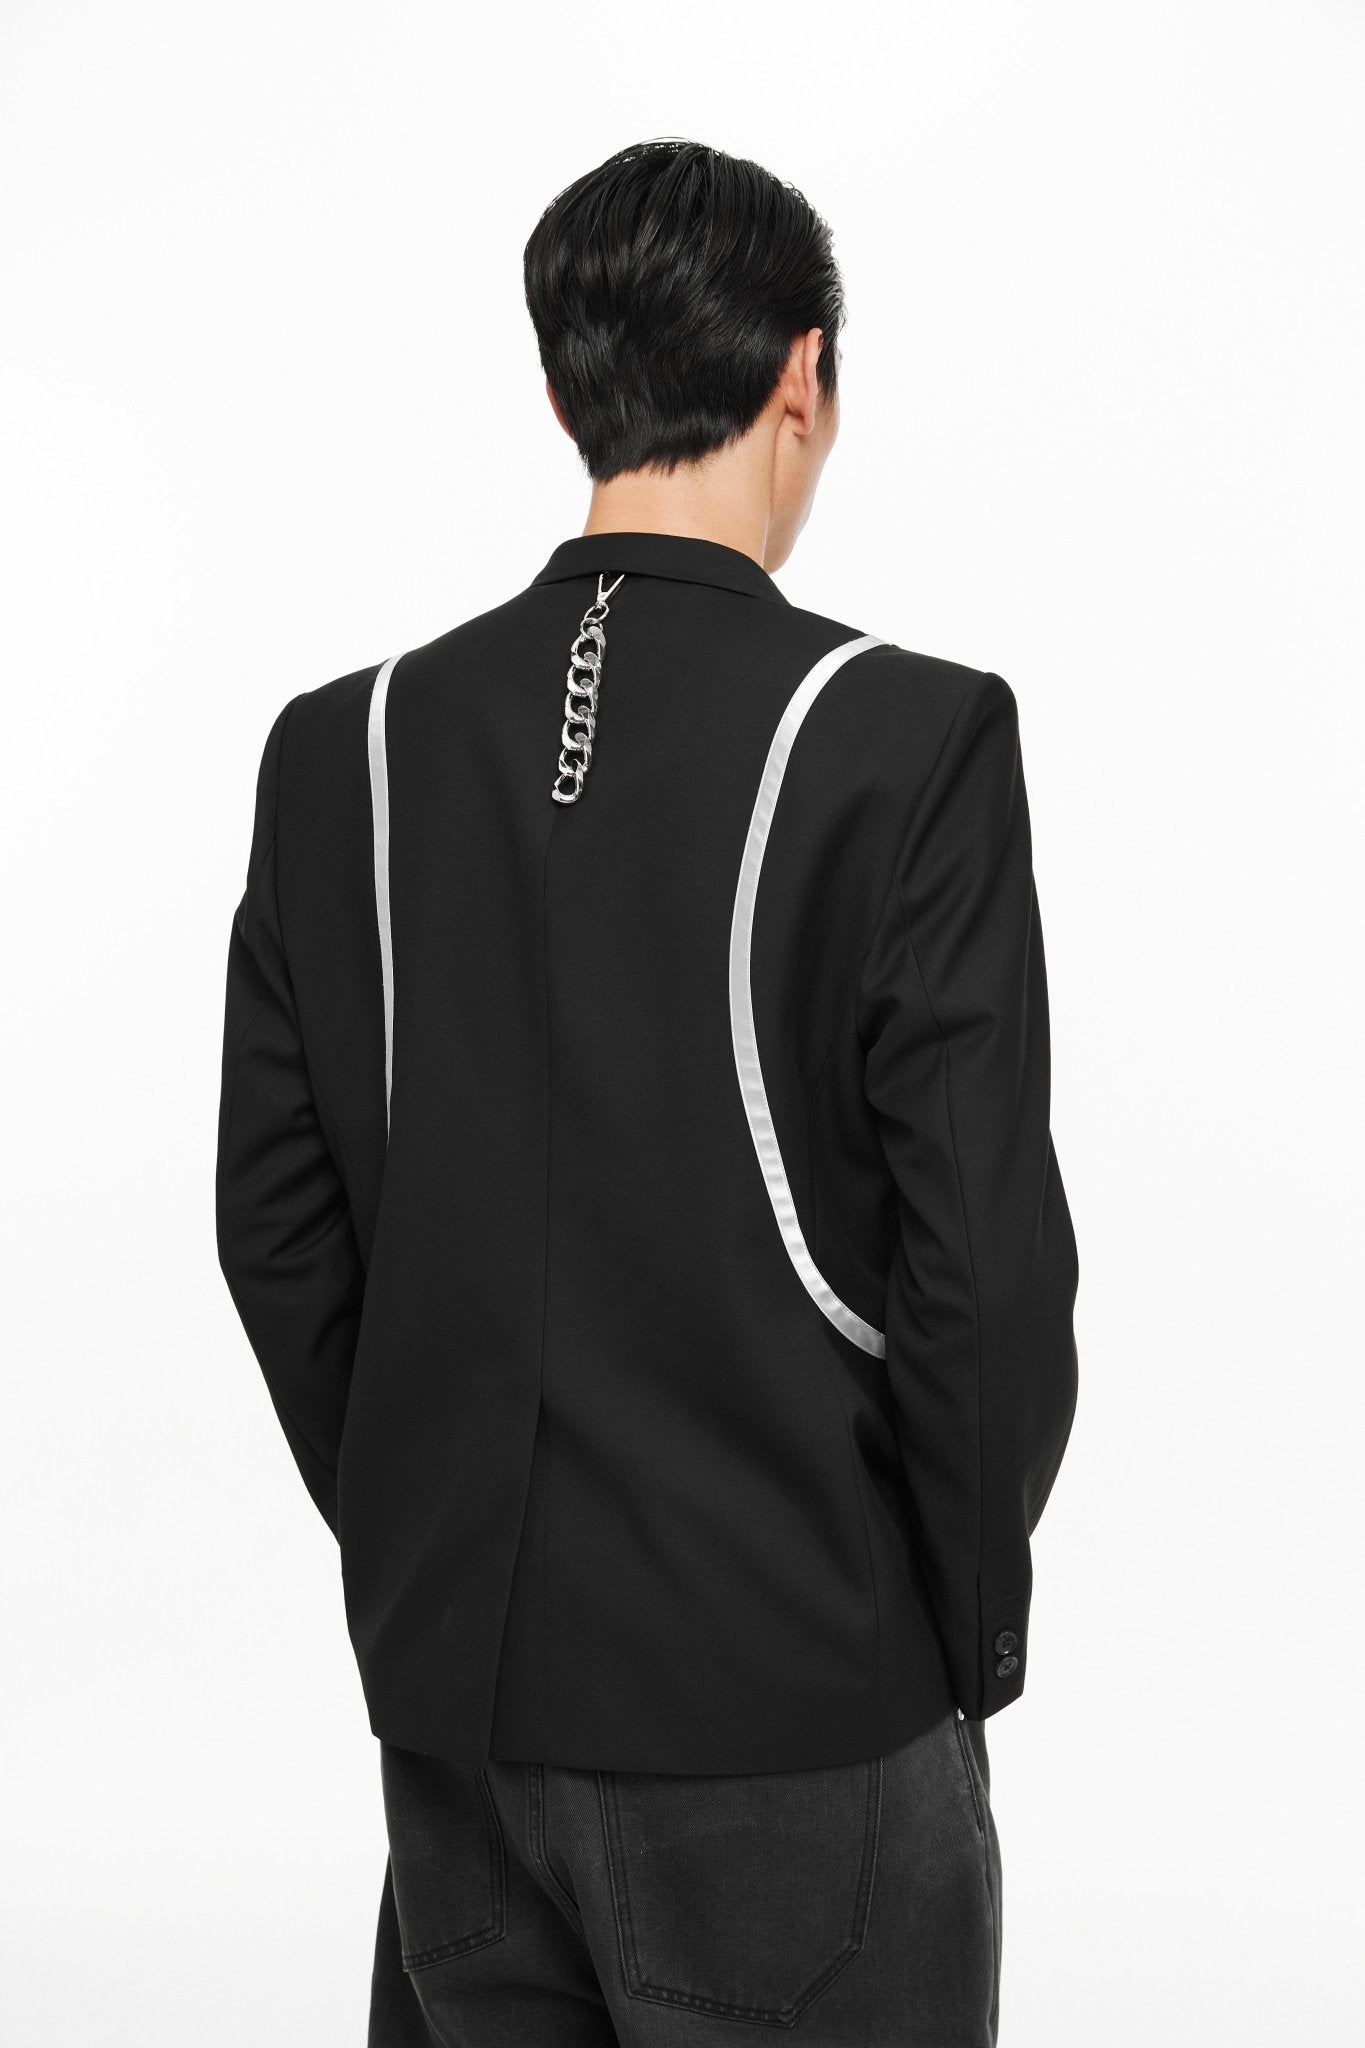 UNAWARES Black Structured Line Spliced Double-Breasted Suit | MADA IN CHINA